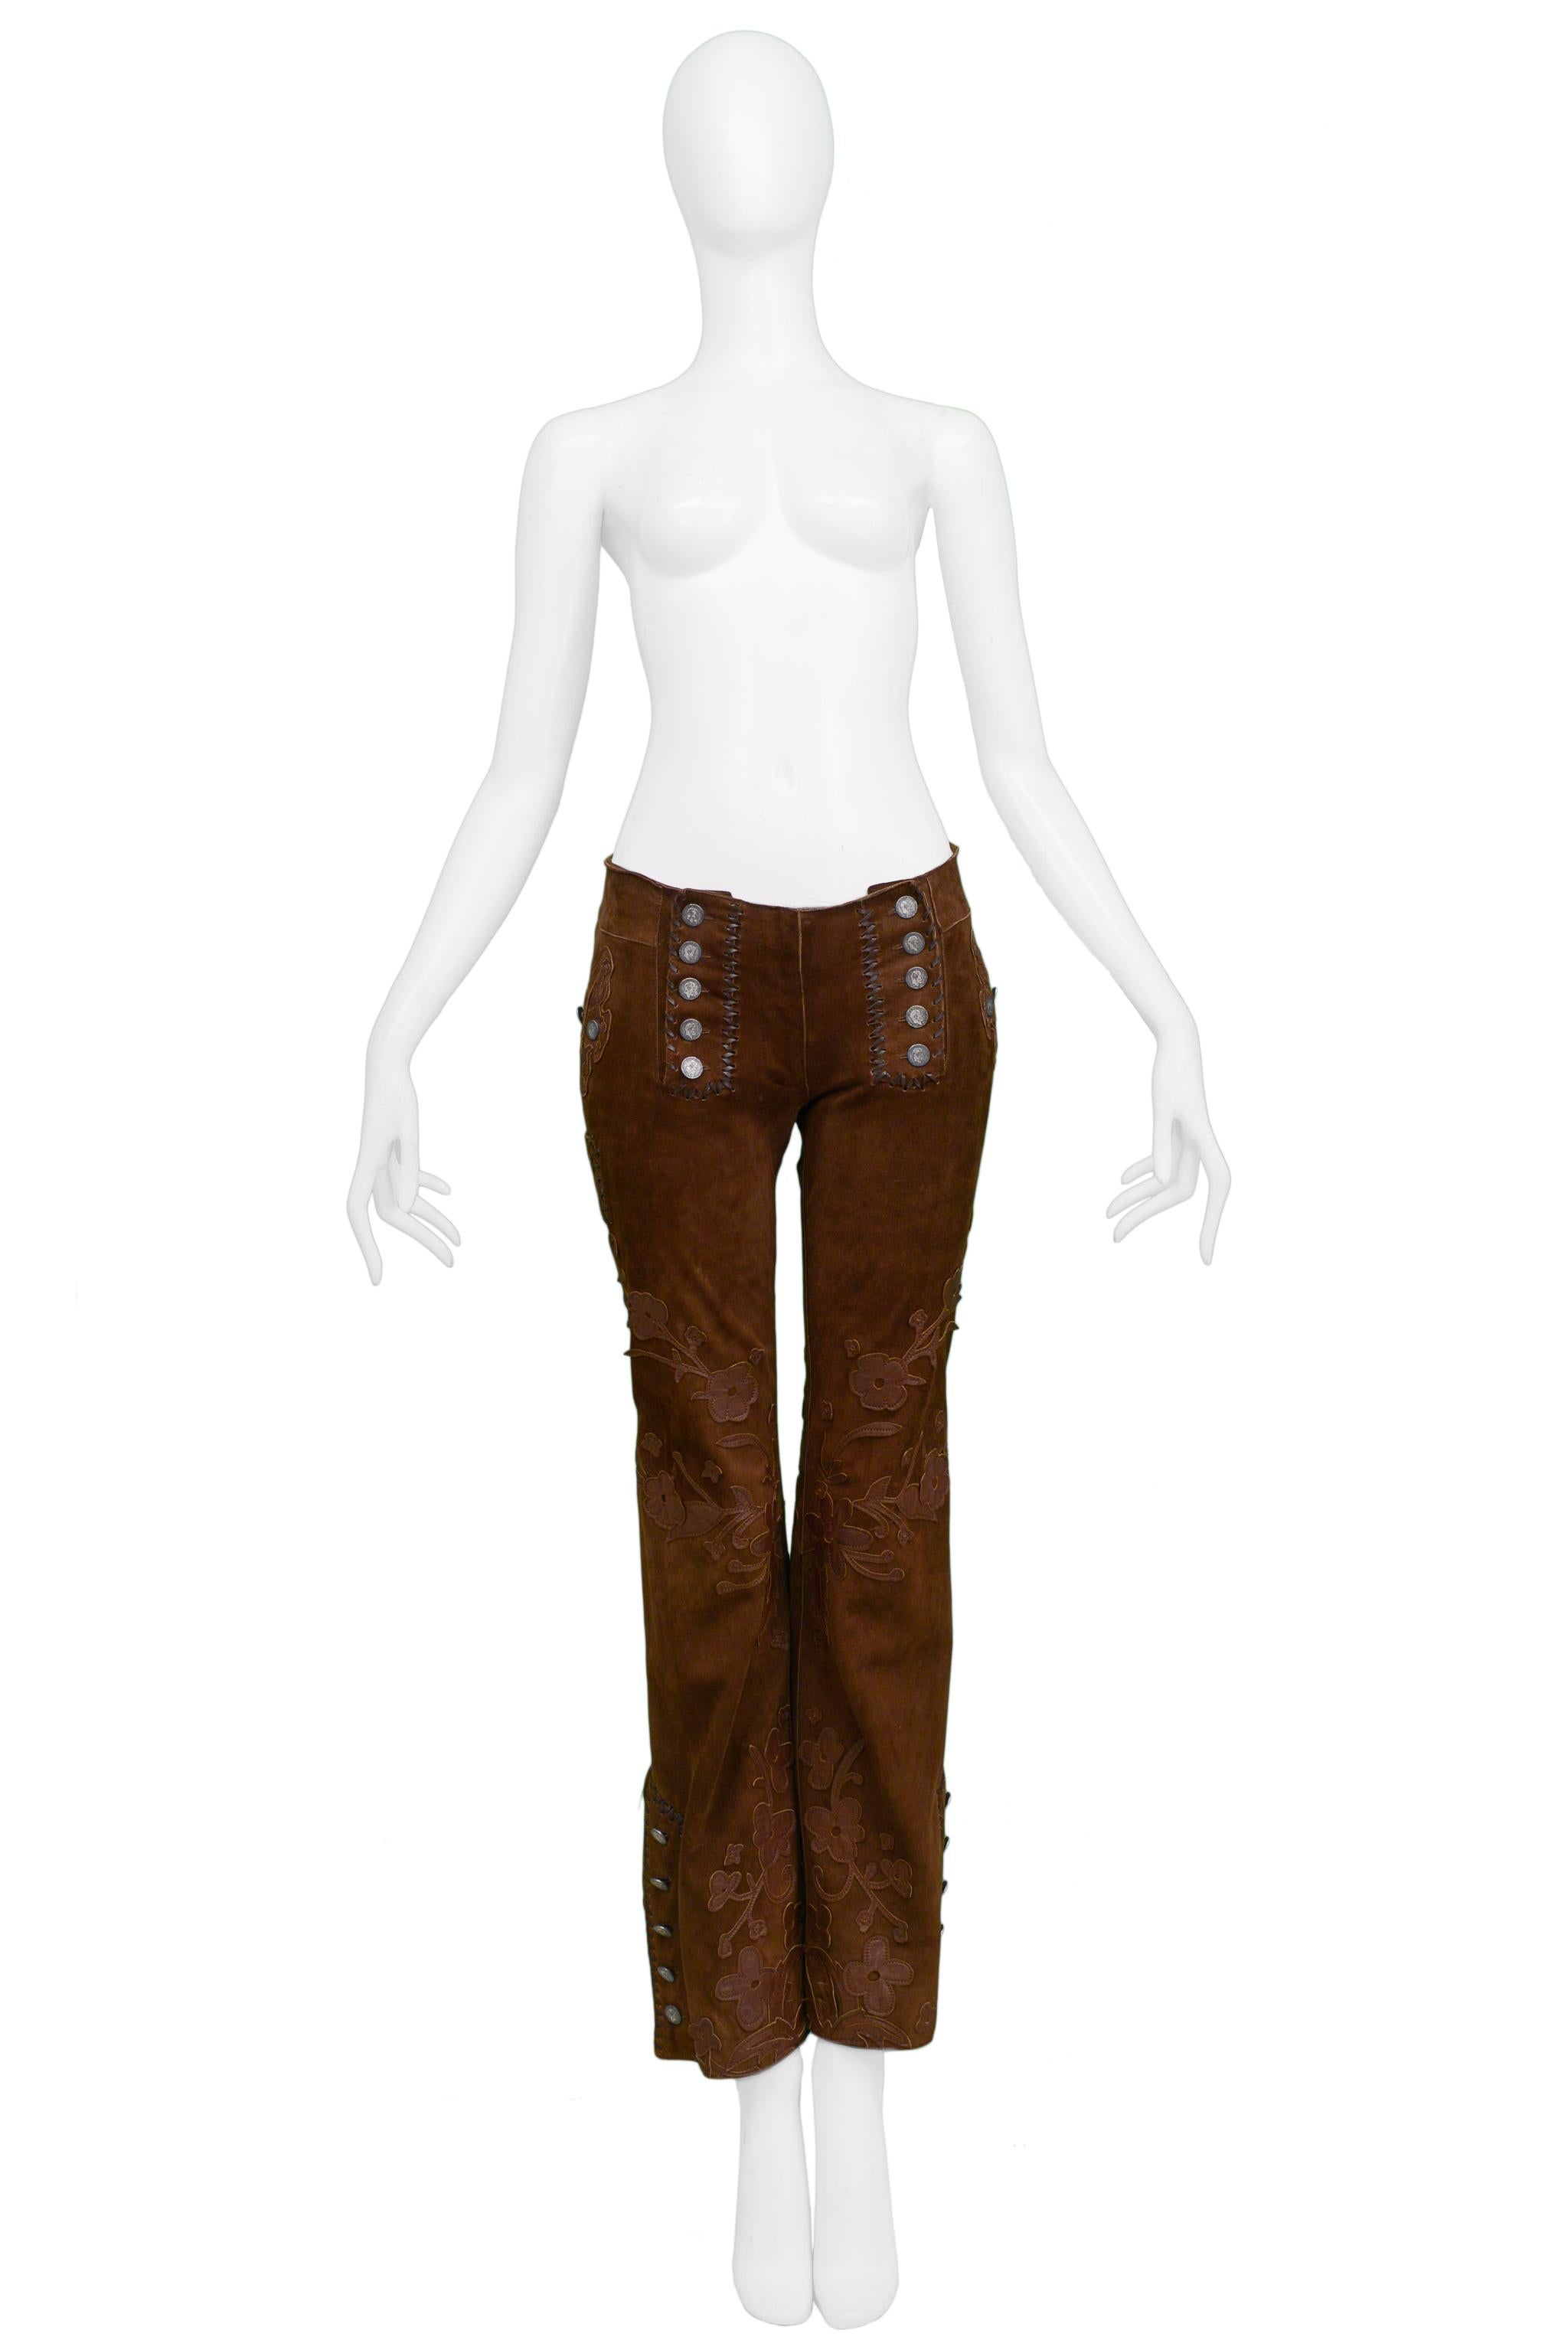 Resurrection Vintage is excited to offer a vintage Dolce & Gabbana brown suede leather pants featuring brown leather floral appliques, whipstitching, button front yoke, brass buckle back belt, back pocket flaps, and flared legs with buttons on the